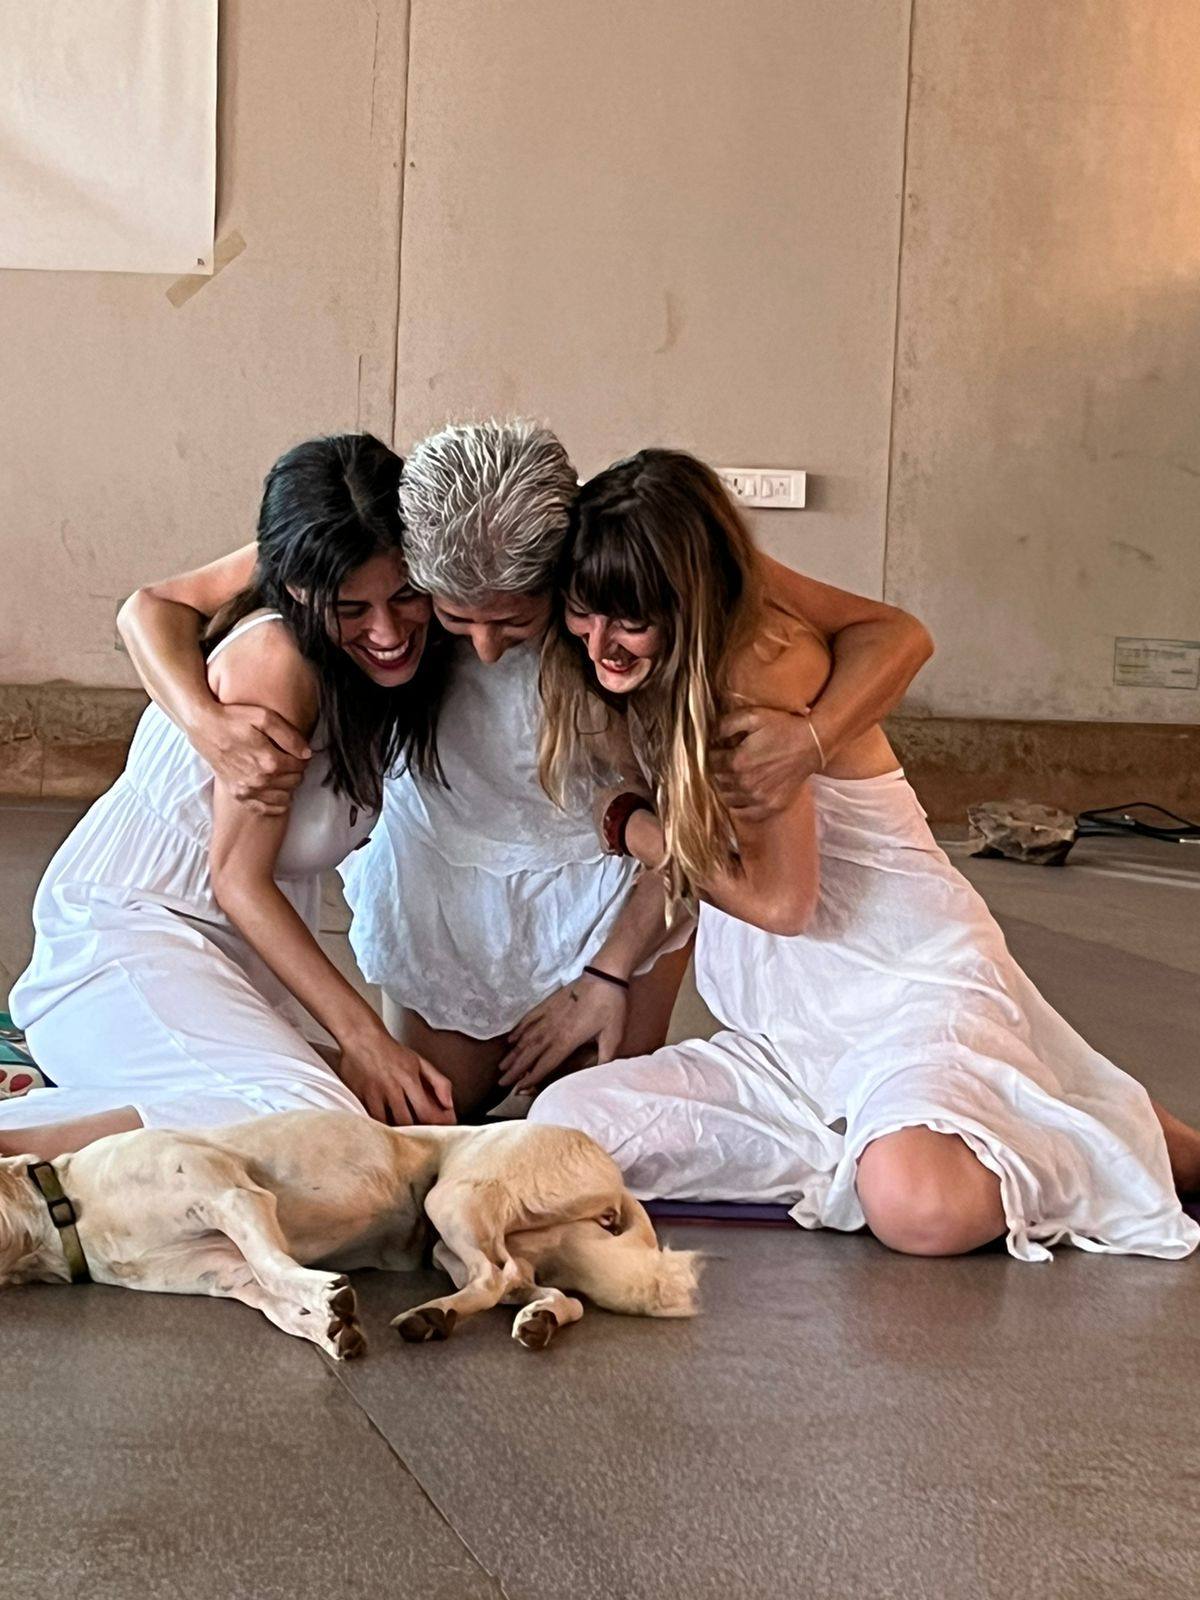 Women bond at Aithein, a  healing retreat in Goa, India. “When we sit in a women’s circle, we connect and support sisterhood through solidarity,” founder Gagori Mitra says. Photo: Gagori Mitra